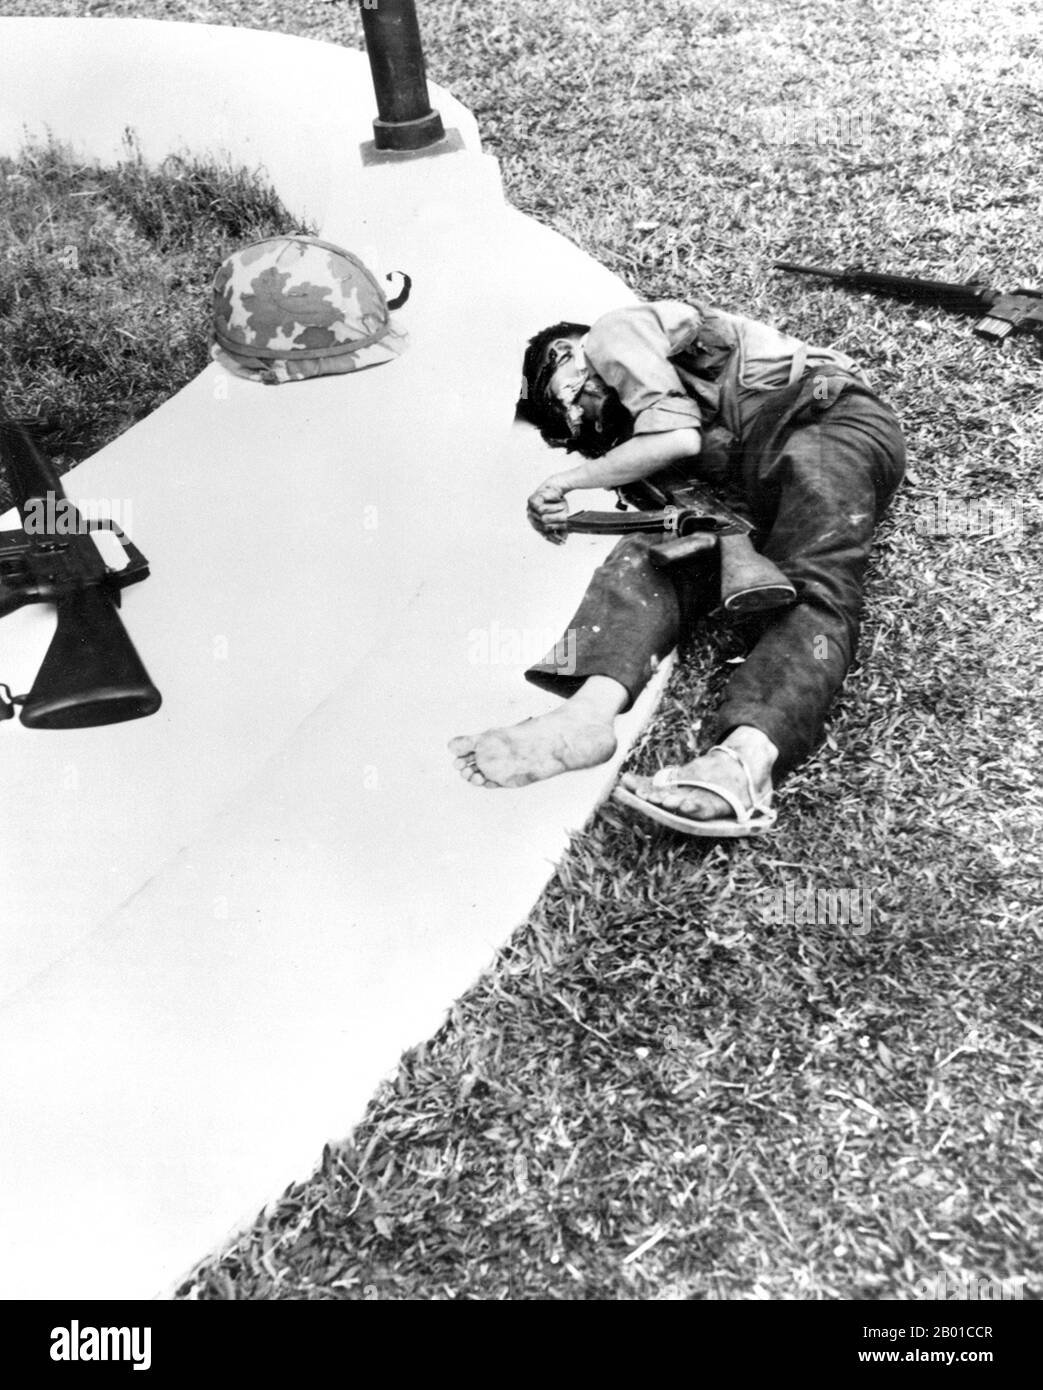 Vietnam: Dead National Liberation Front (Viet Cong) guerrilla,  US Embassy, Saigon - Tet Offensive, 31 January 1968.  Shortly after midnight on 31 January 1968, 19 Vietcong sappers from the elite C-10 Sapper Battalion gathered at a Vietcong safe house in a car repair shop at 59 Phan Thanh Gian Street to distribute weapons and conduct final preparations for the attack. At 02:47 hours, the Vietcong blew a small hole in the perimeter wall on Thong Nhut Boulevard and gained access to the embassy compound. Stock Photo